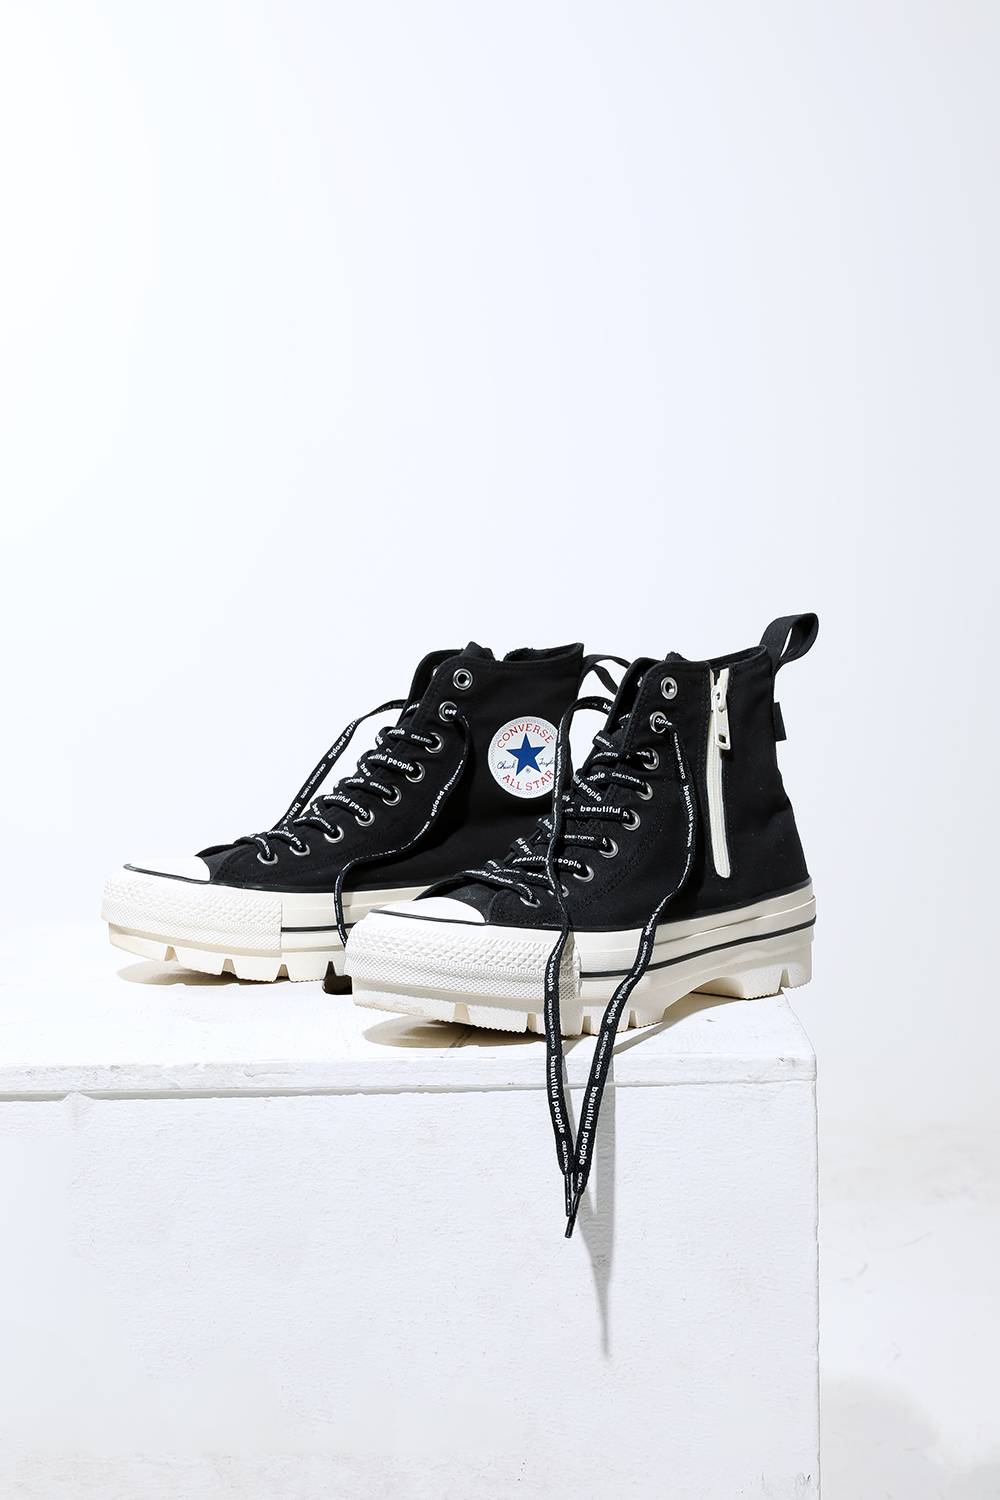 Beautiful People ×Converse All Star スニーカー | red-village.com